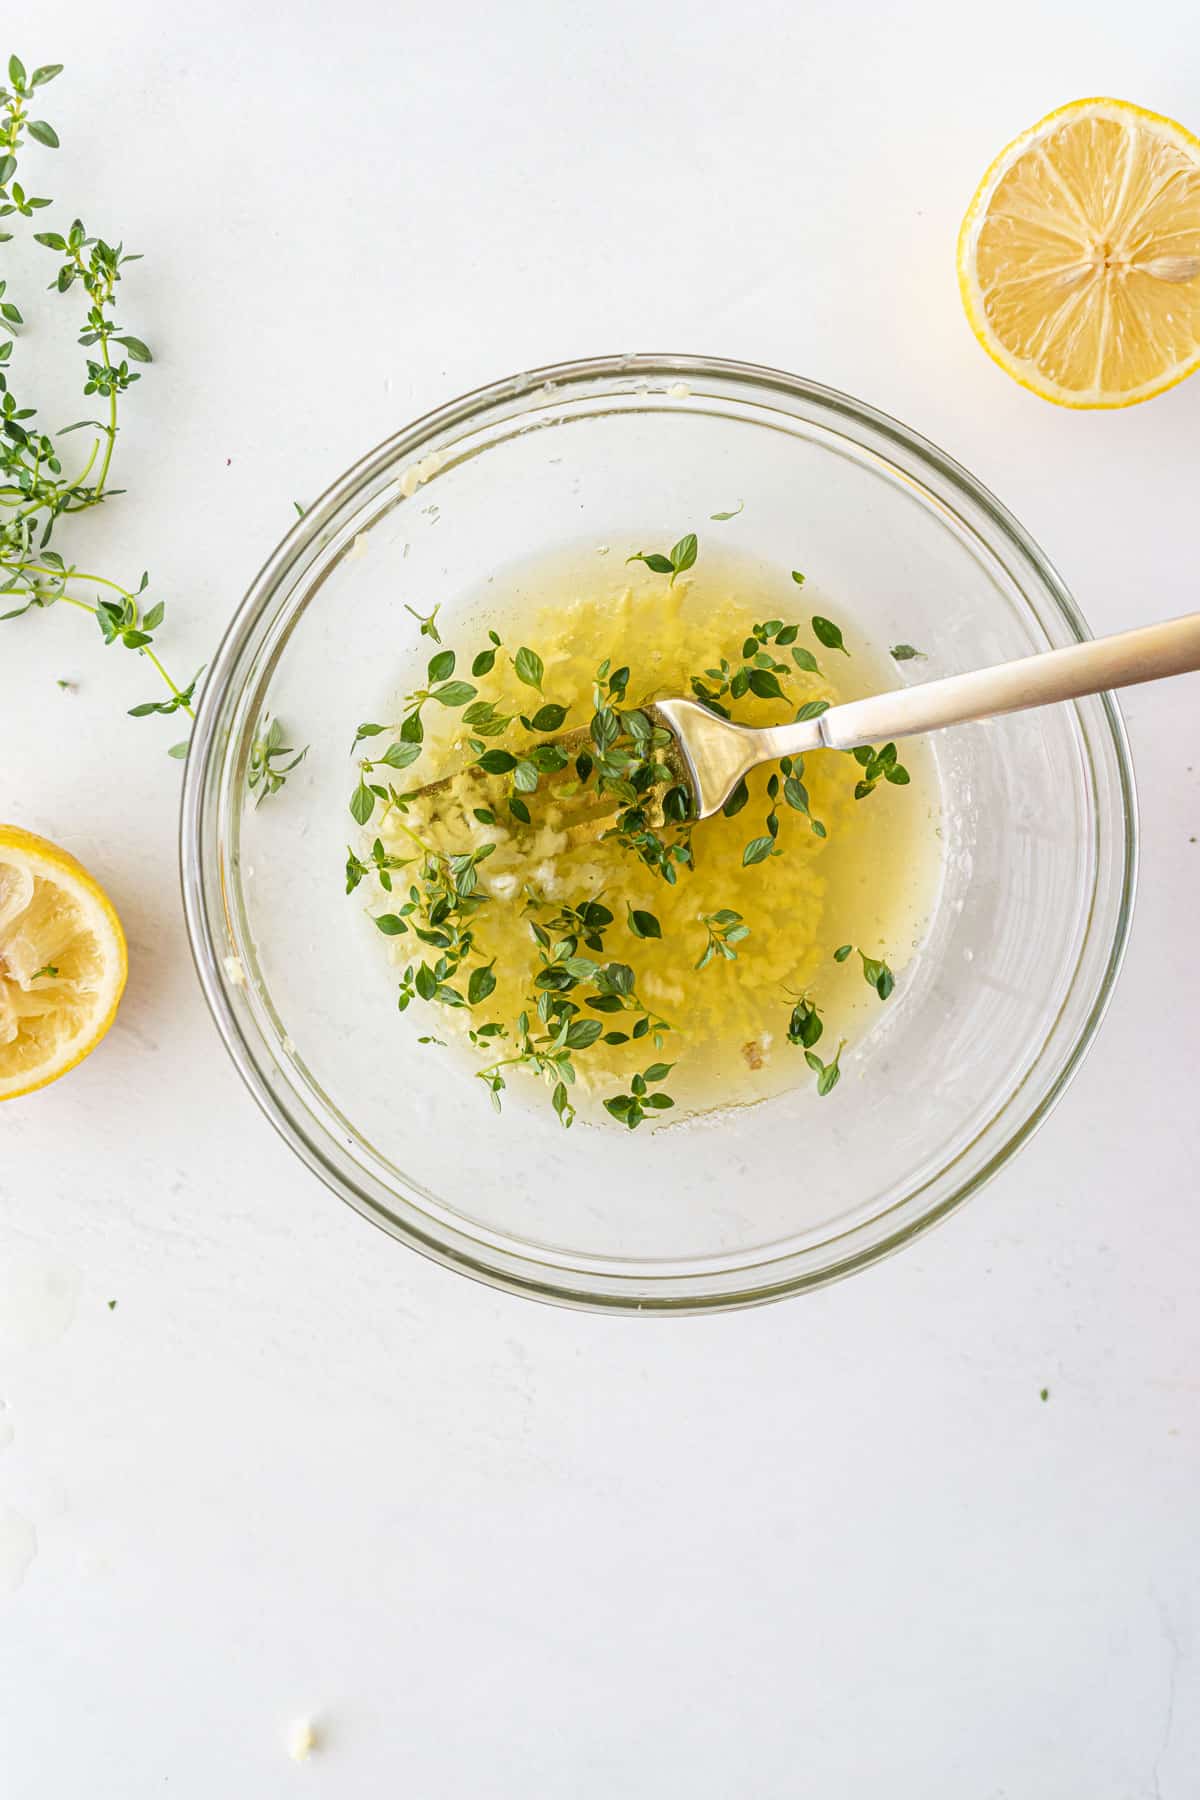 Combinging oil, garlic, lemon juice and thyme in a bowl for Sheet pan Chicken Thighs recipe